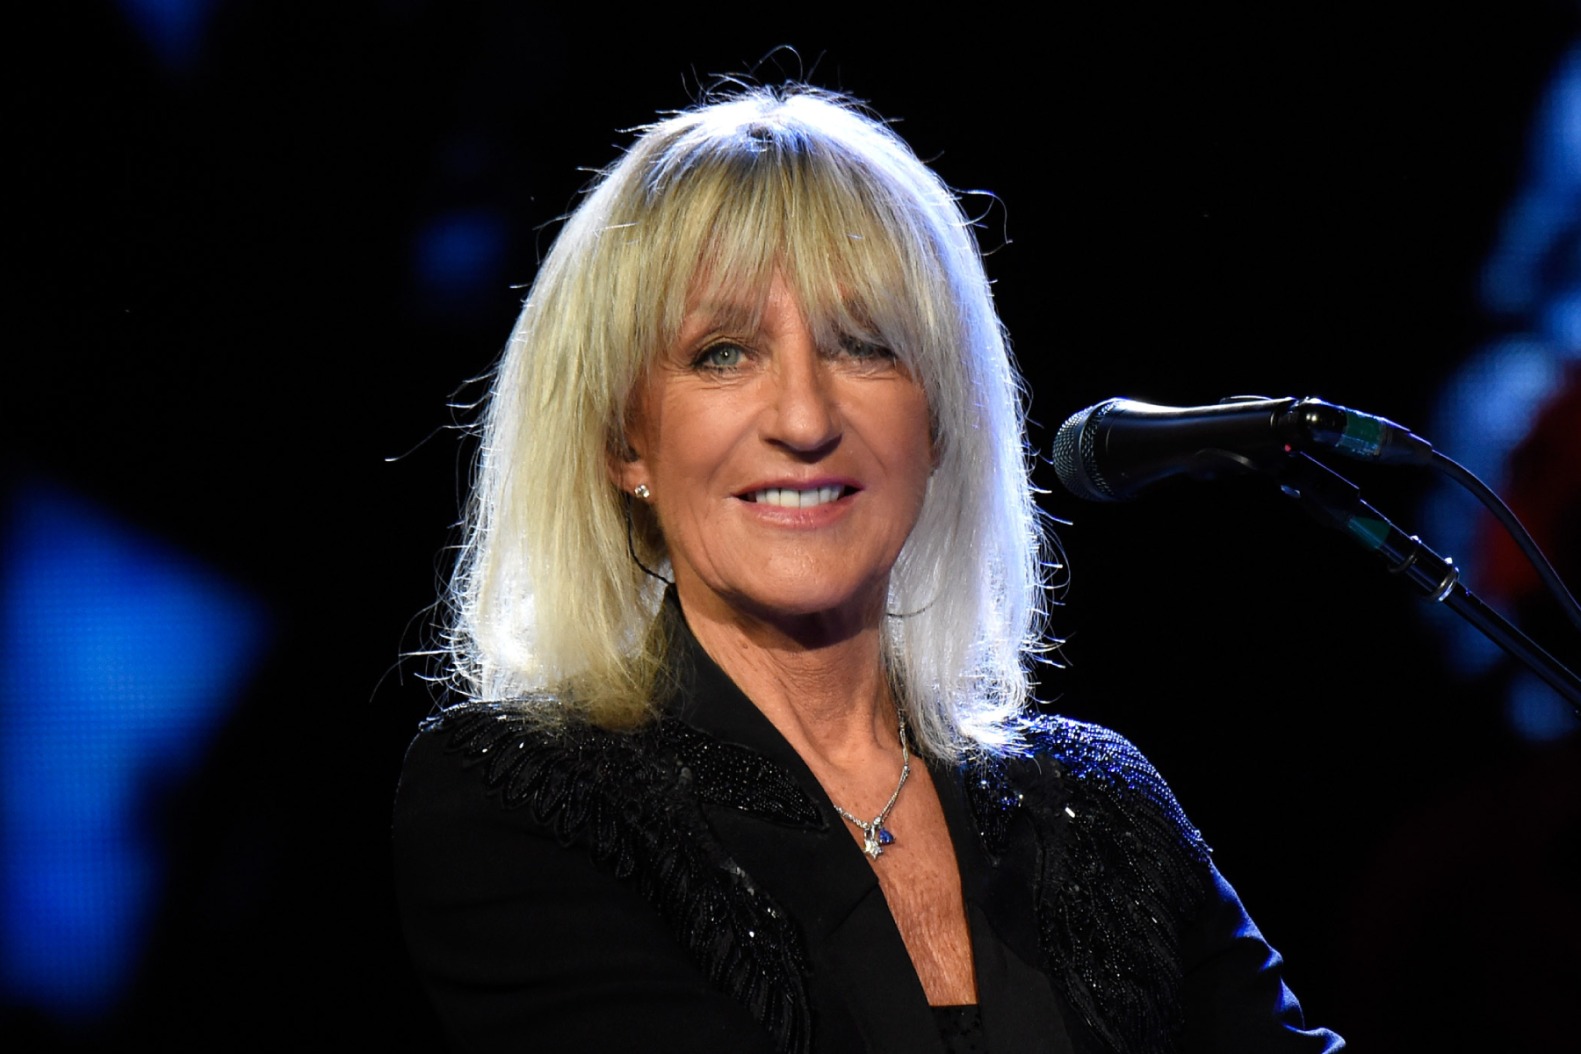 25-captivating-facts-about-christine-mcvie